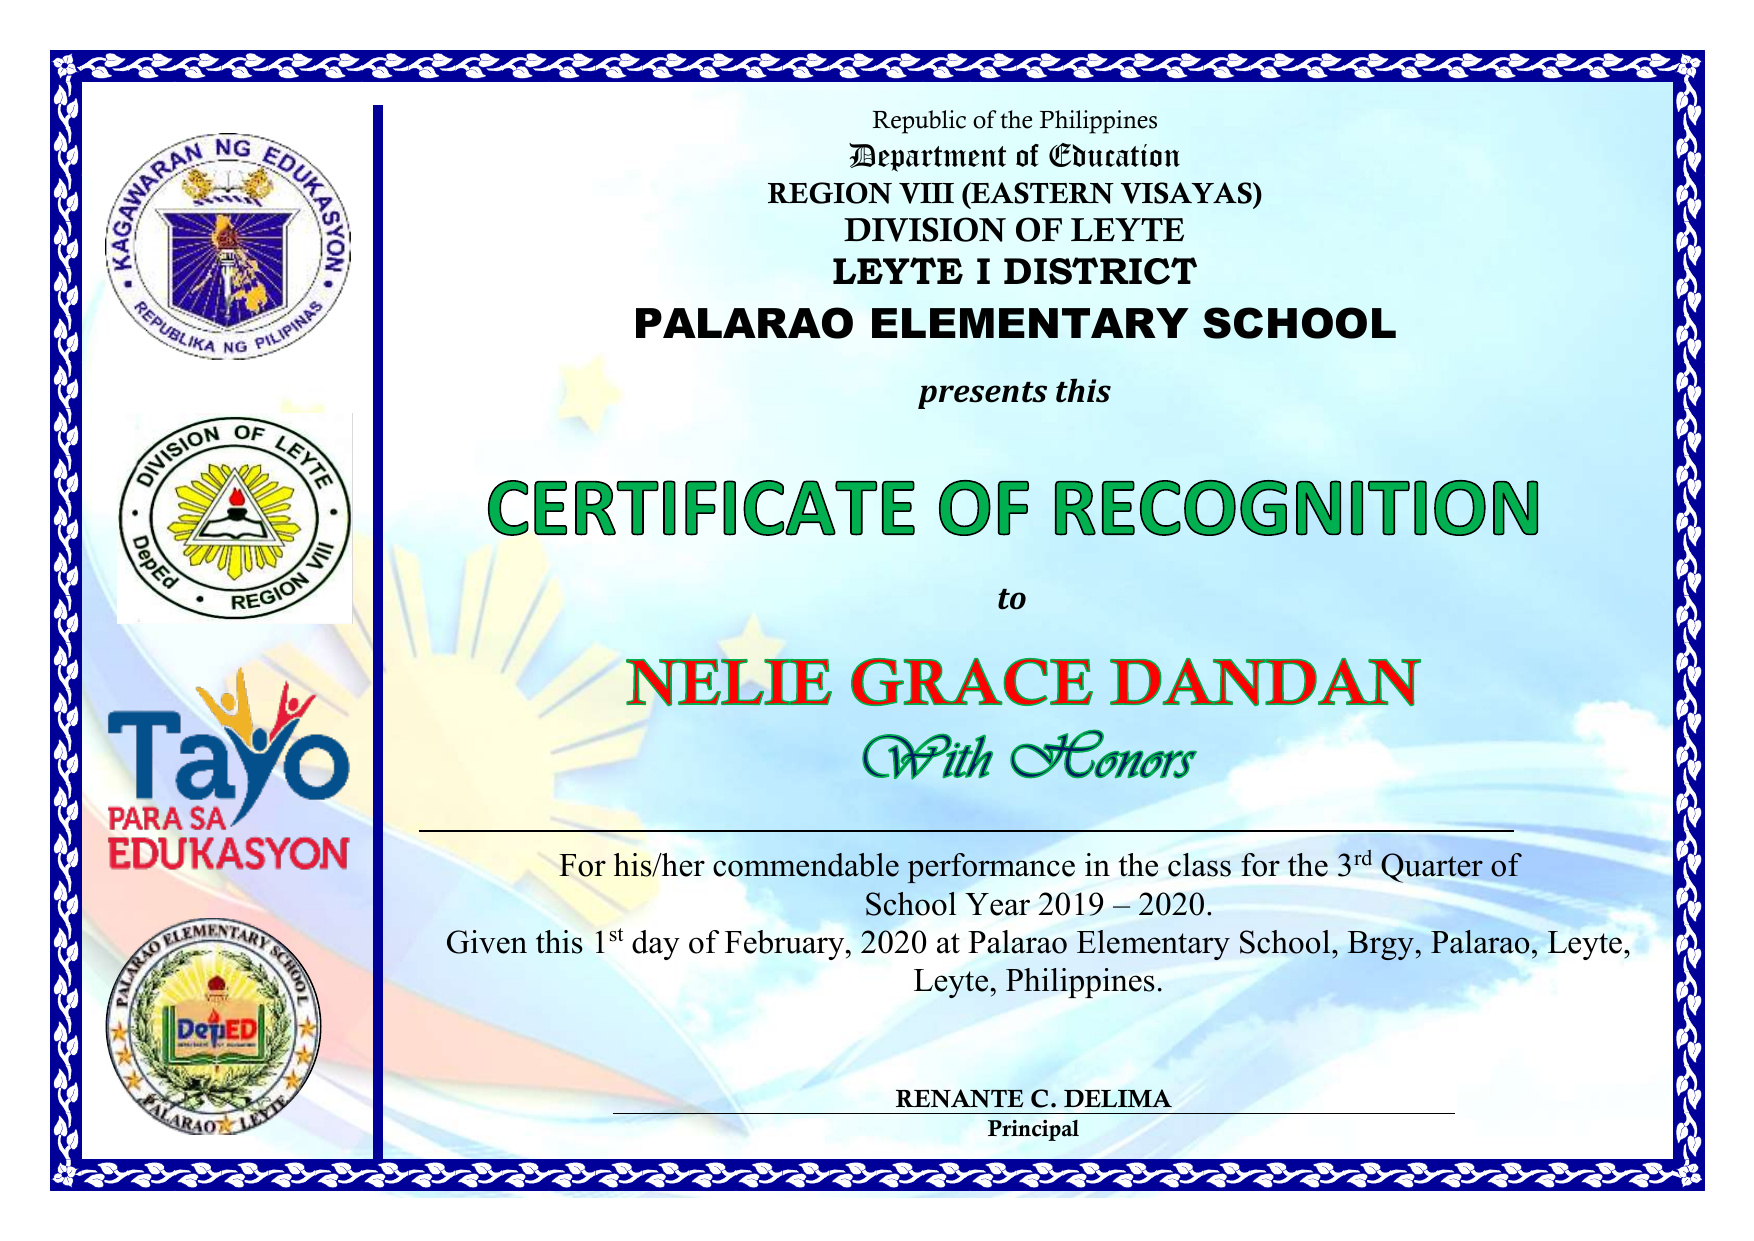 Sample Template Grade Certificate Deped Lps Deped Teachers Images | My ...